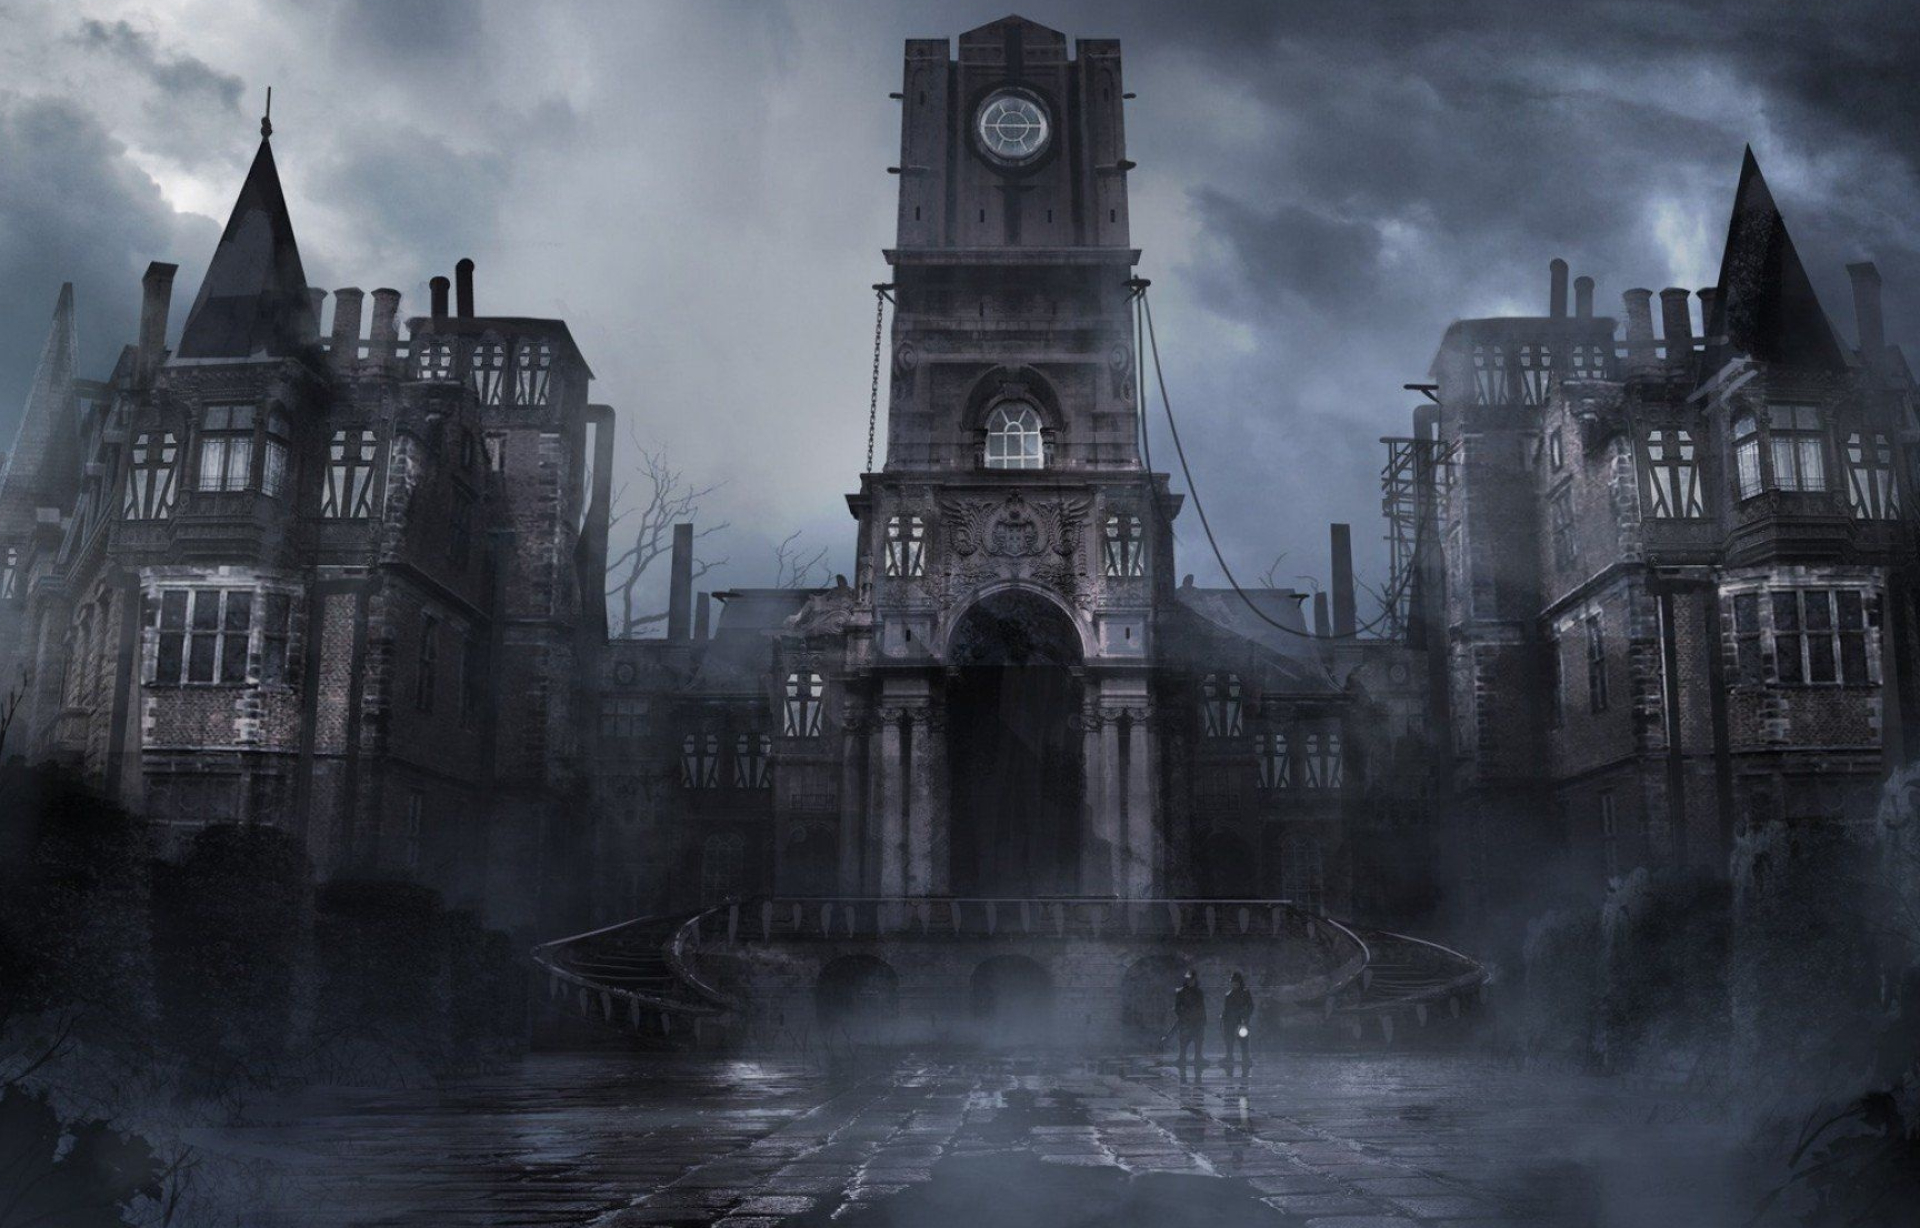 Gothic Art: Aesthetic, A grim medieval town, Fog, Gloomy estate, Old castle, Gothic Architecture. 1920x1230 HD Wallpaper.